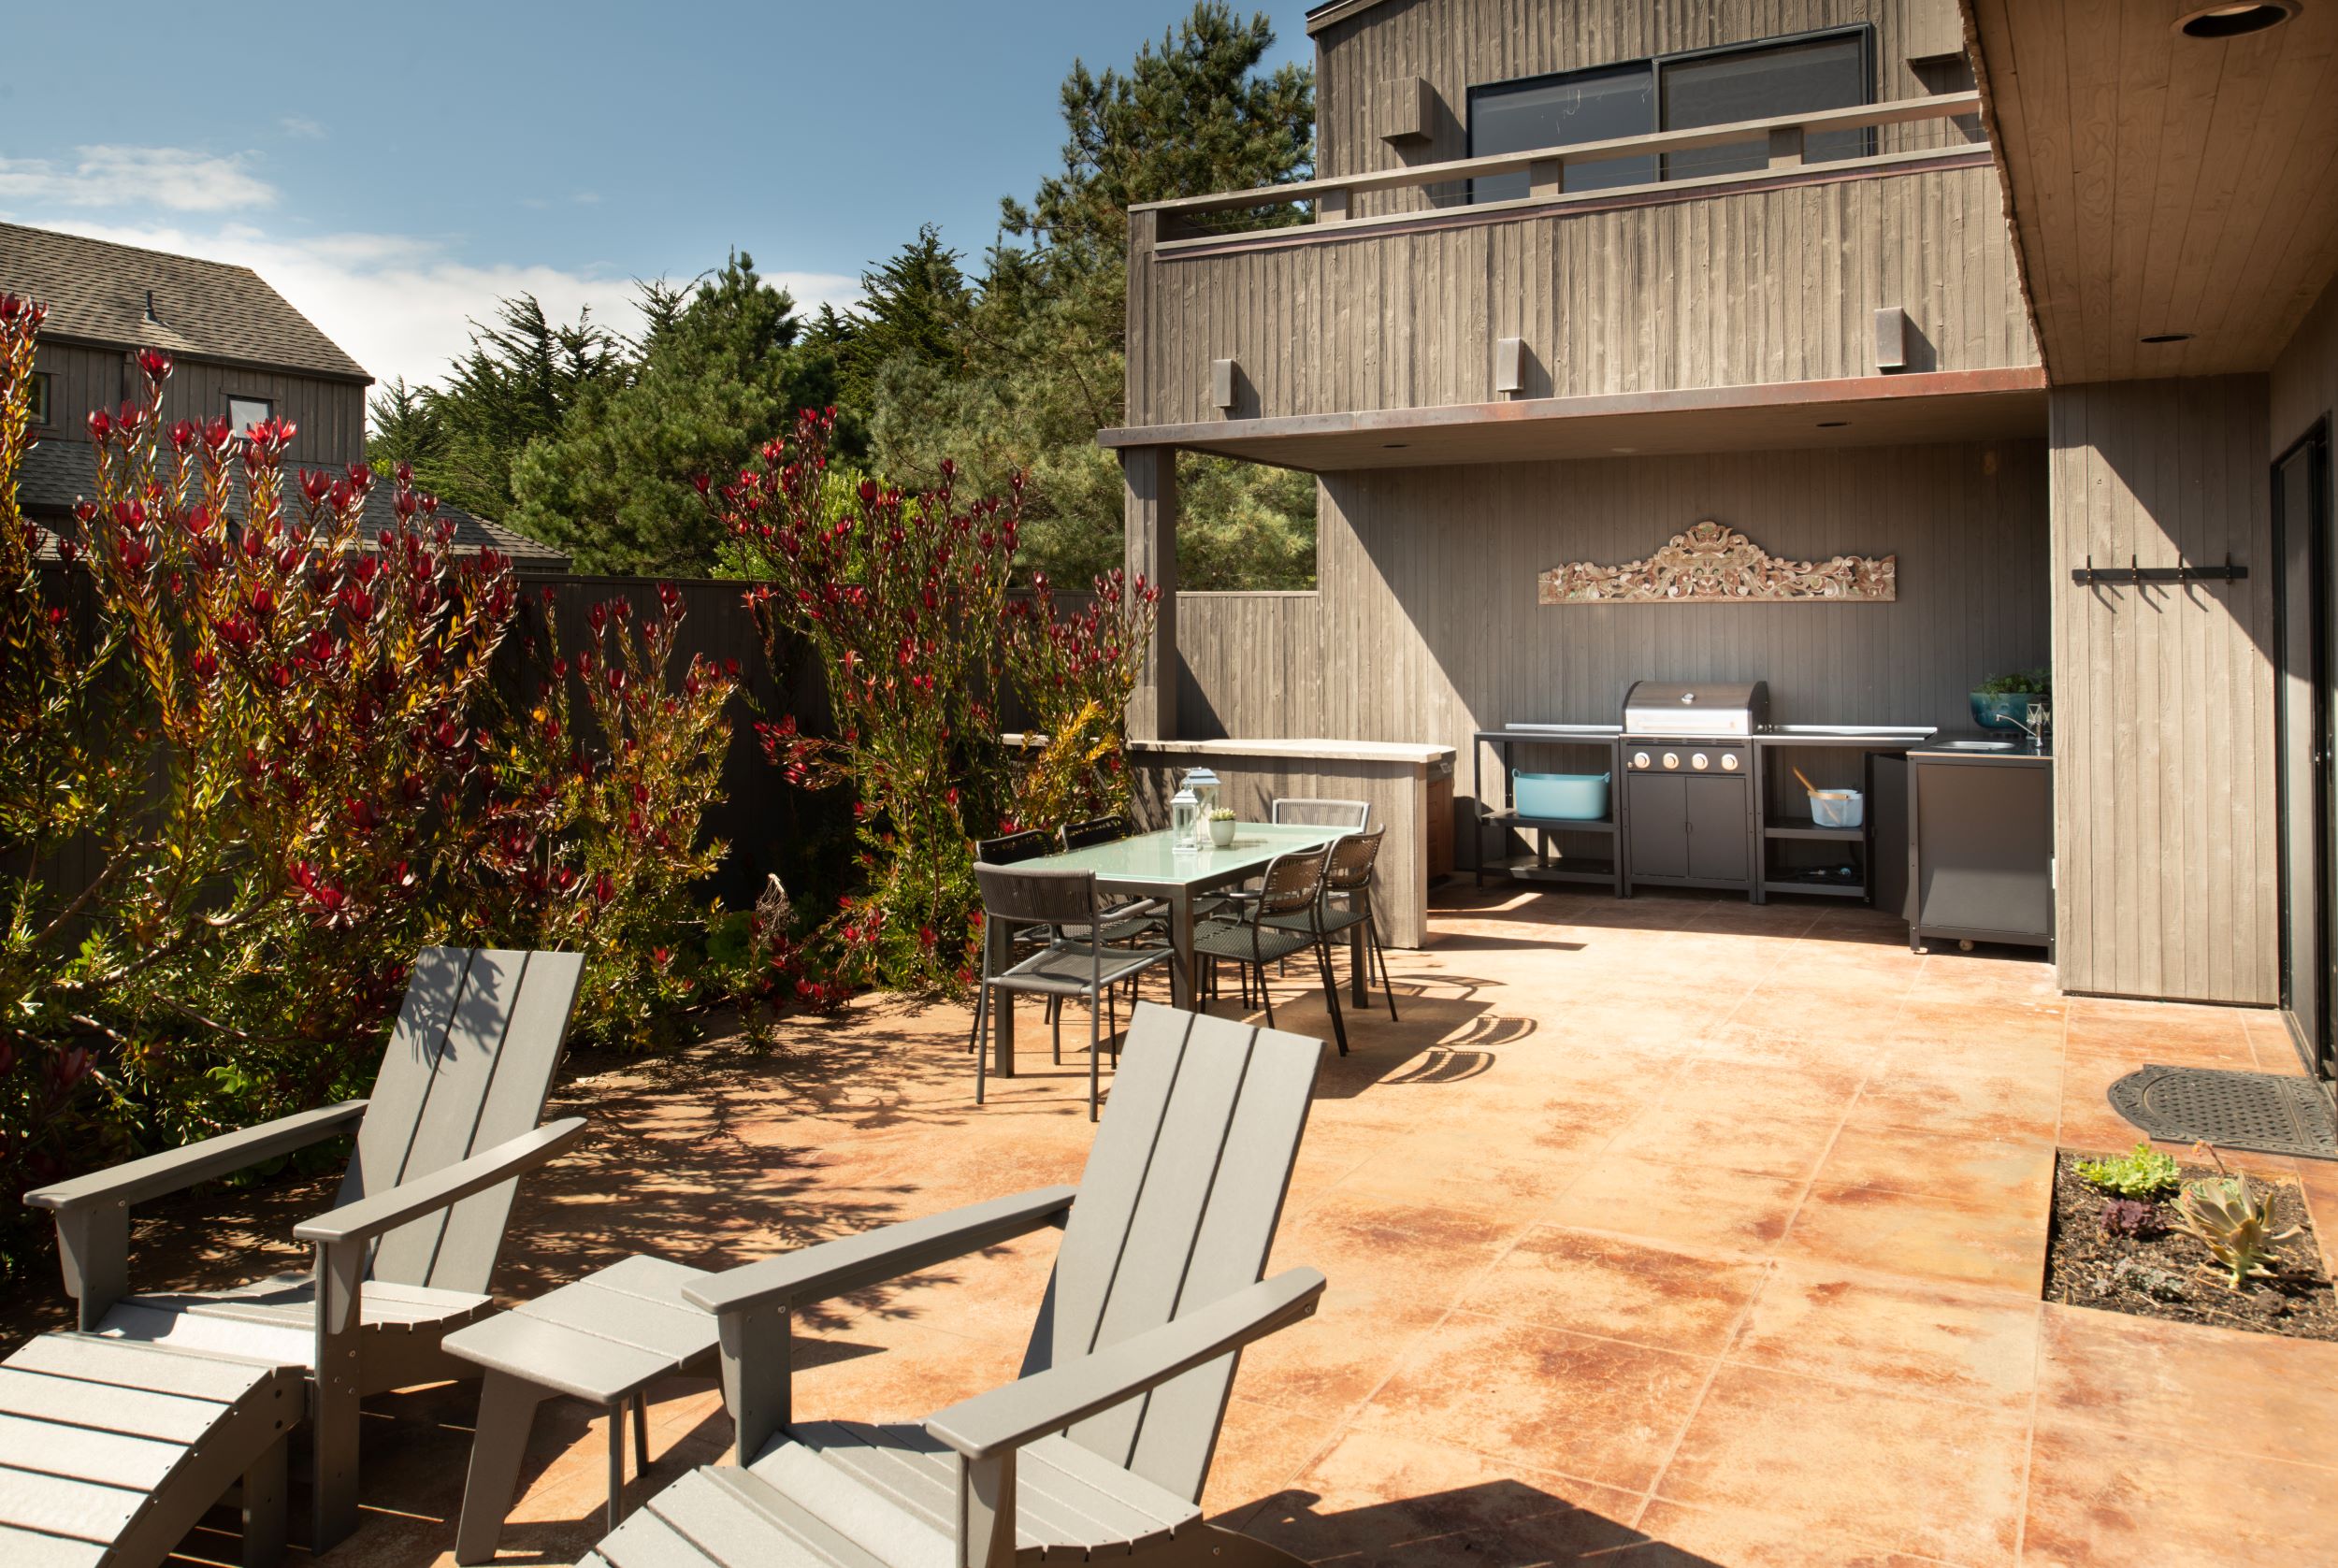 Solstice - outside view of patio with dining table, lounge chairs and grill